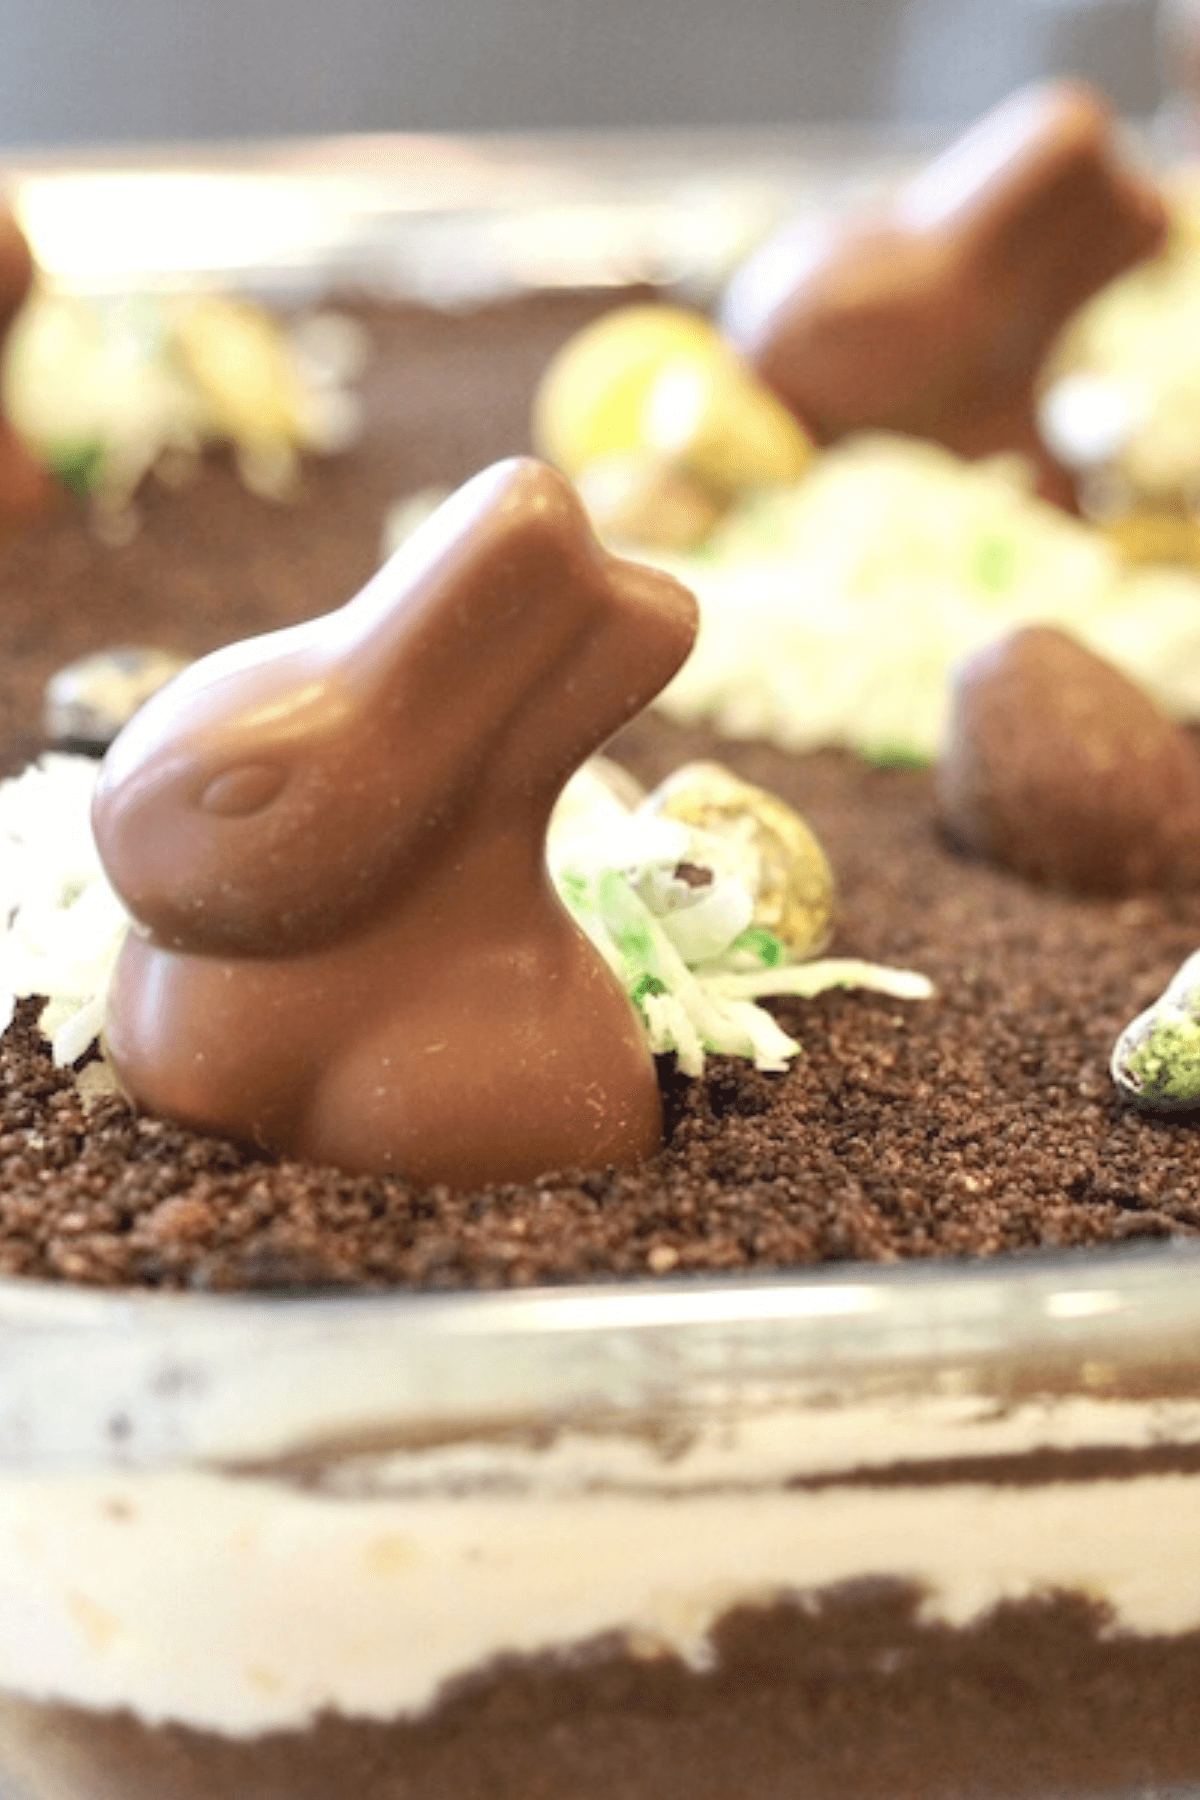 Easter Dirt Cake image with chocolate bunny nestled in the dirt with coconut grass.